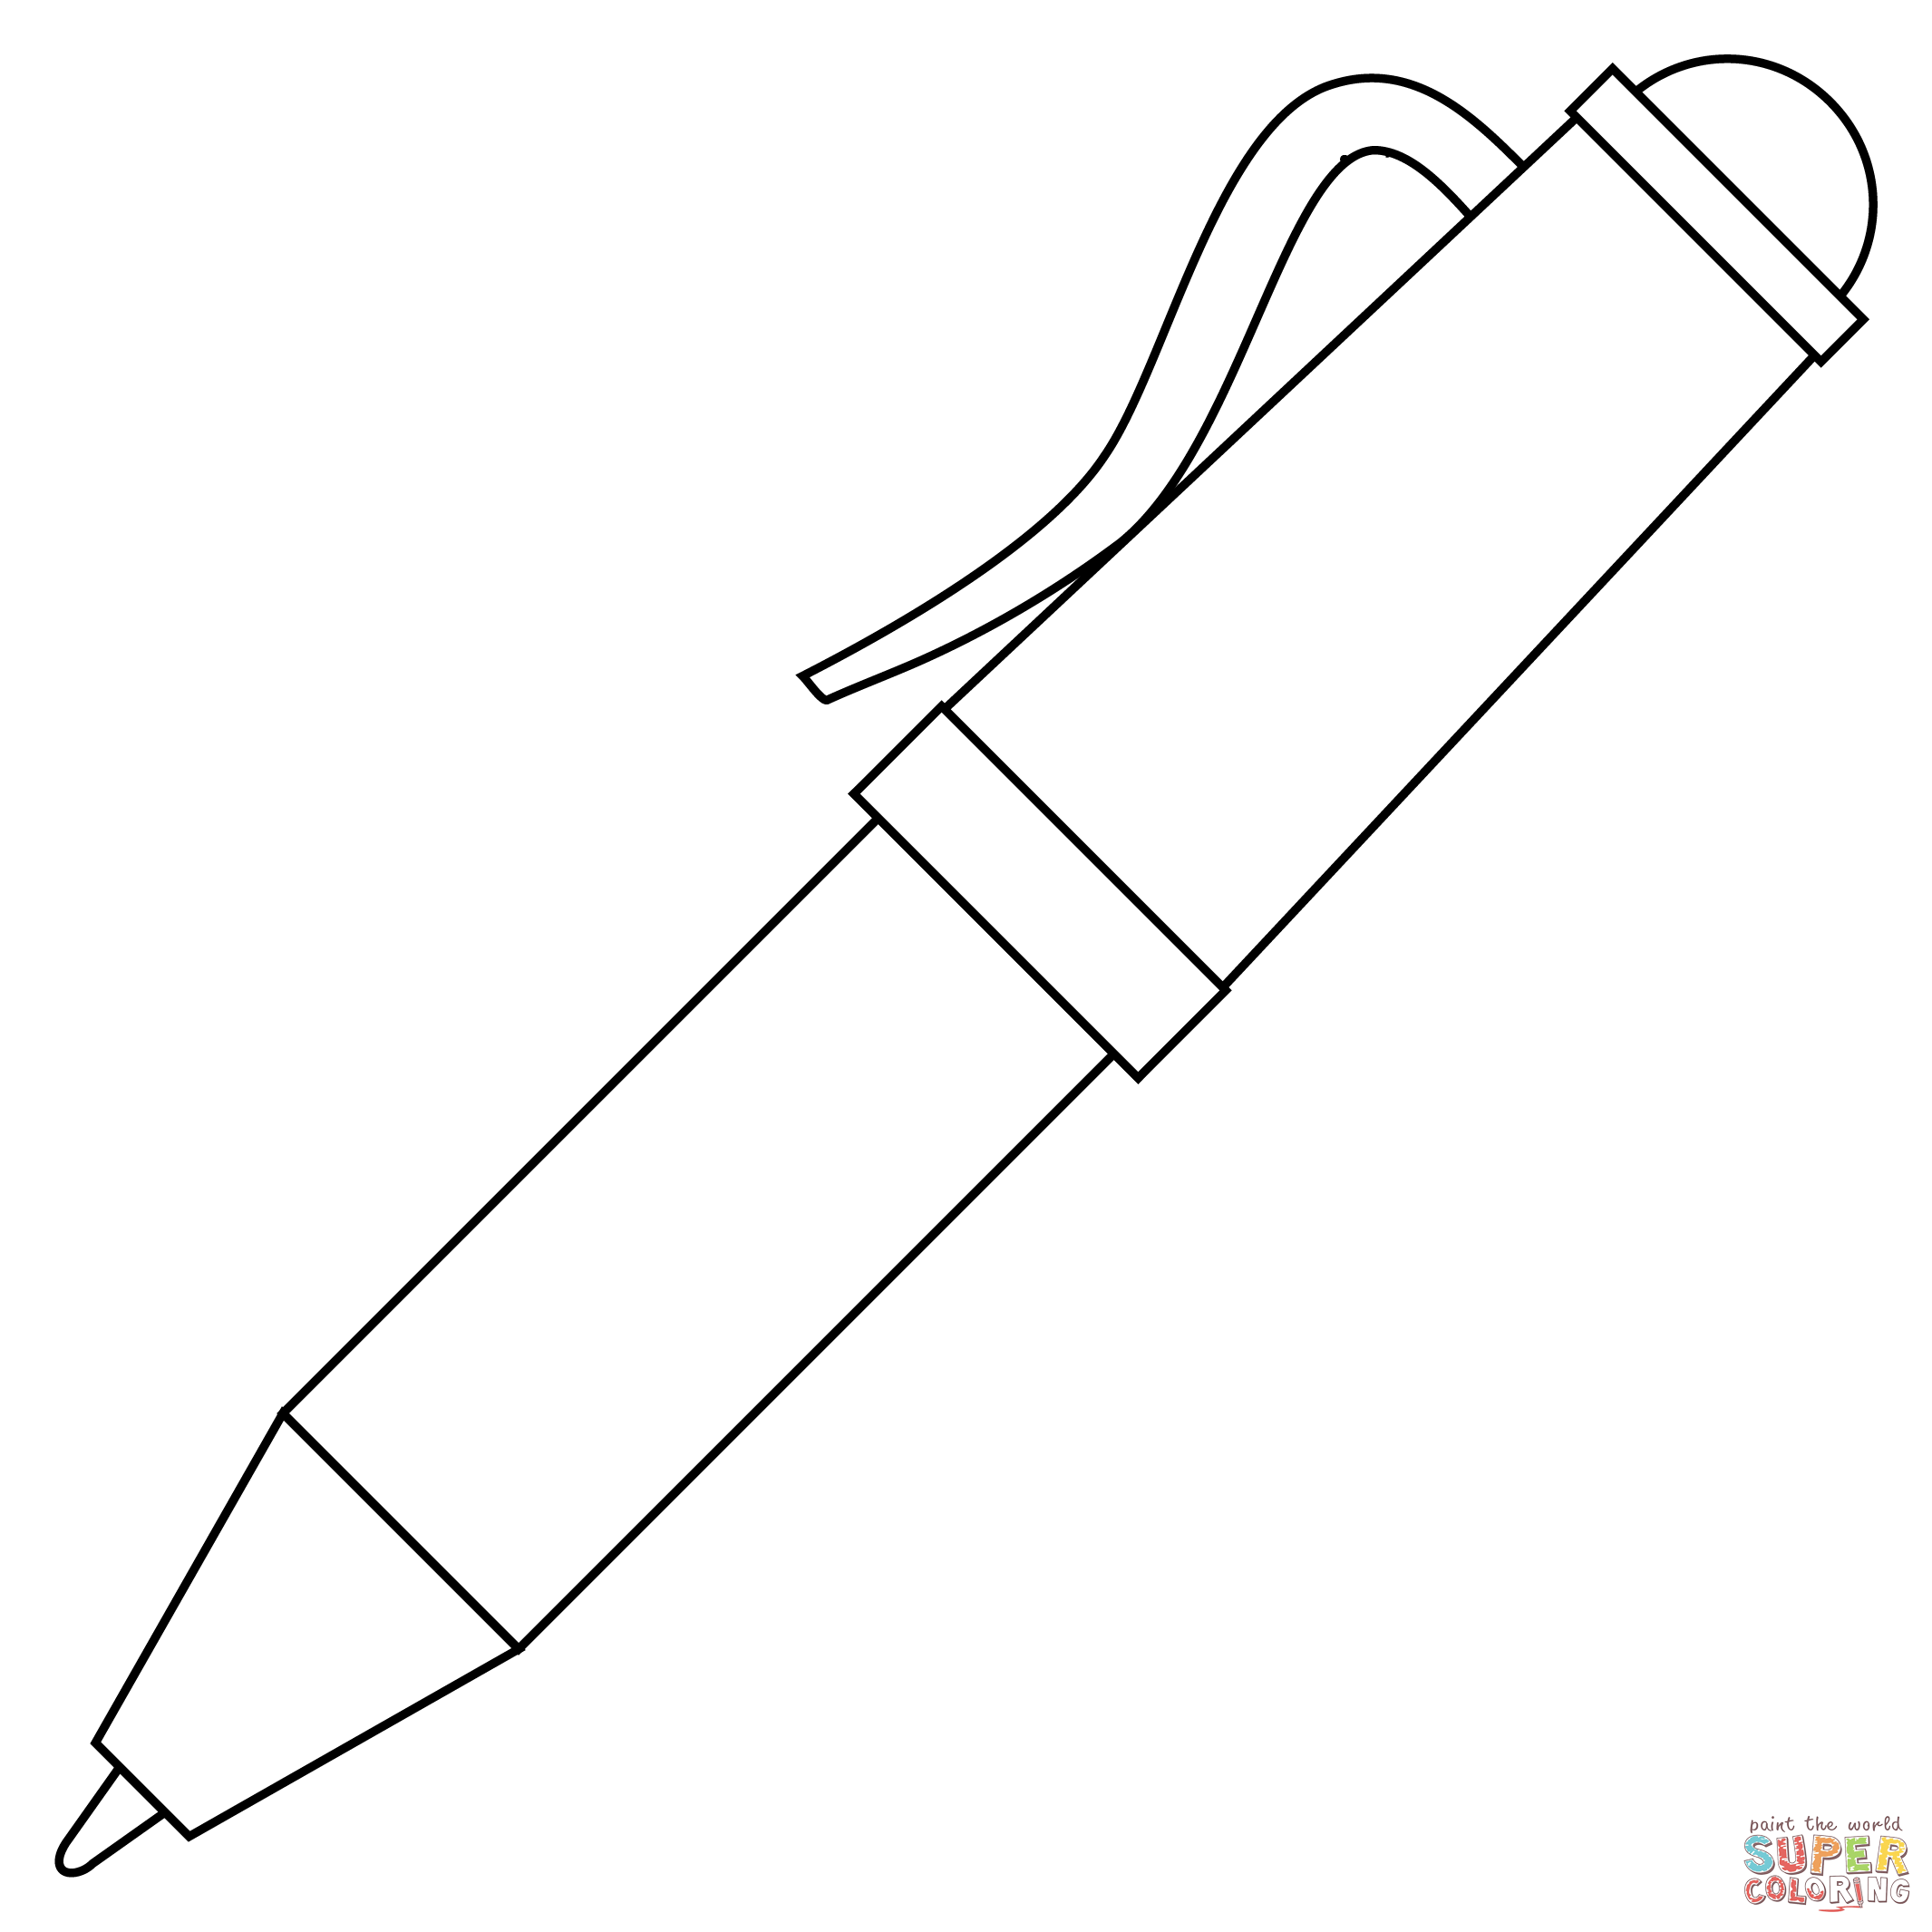 Pen coloring page free printable coloring pages